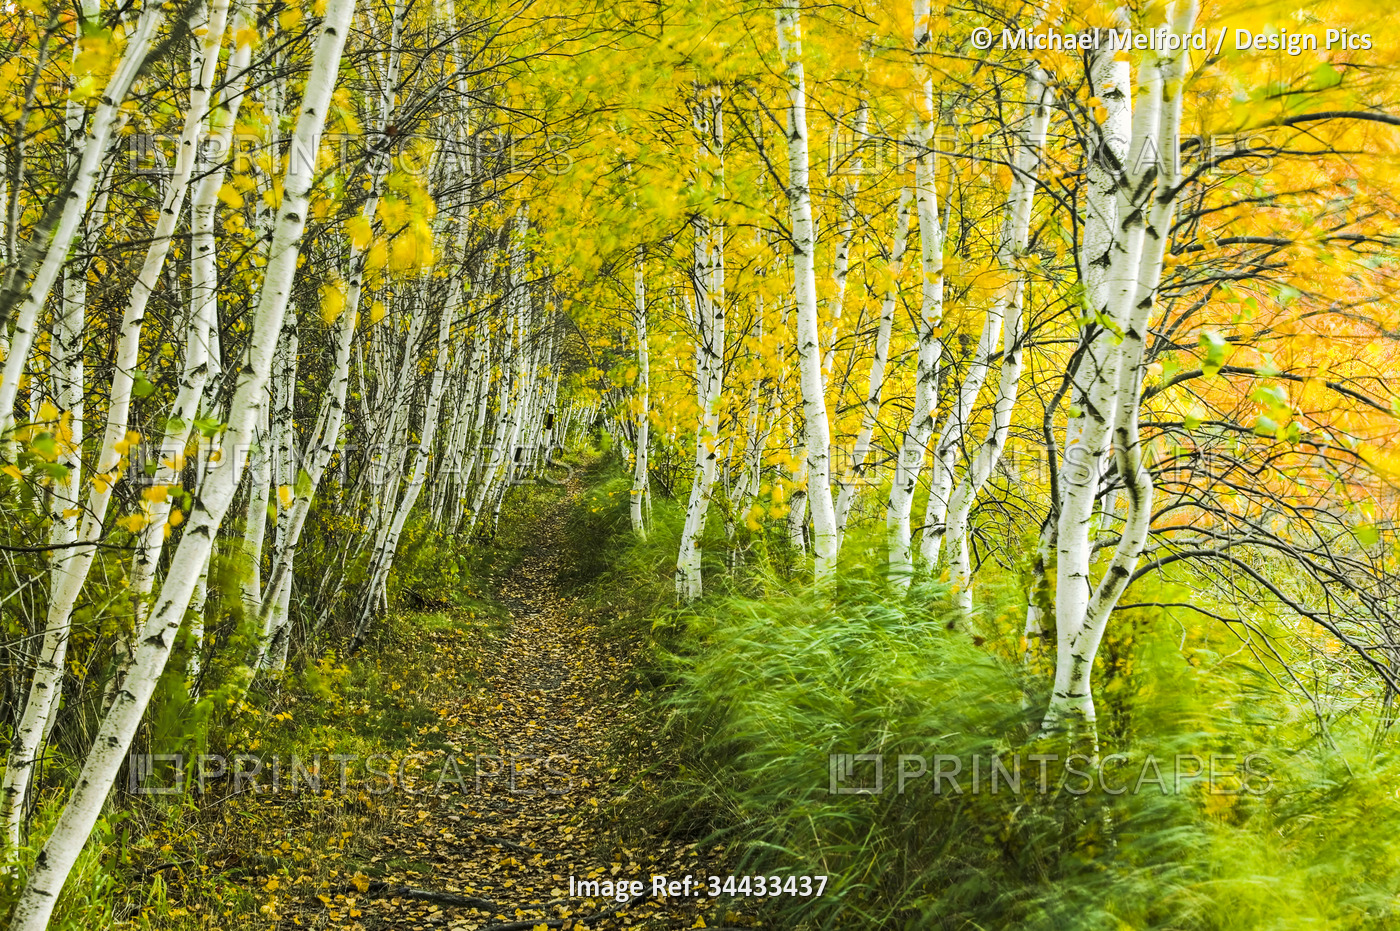 Sedge-lined trail through a birch forest in Acadia National Park, Maine, USA; ...